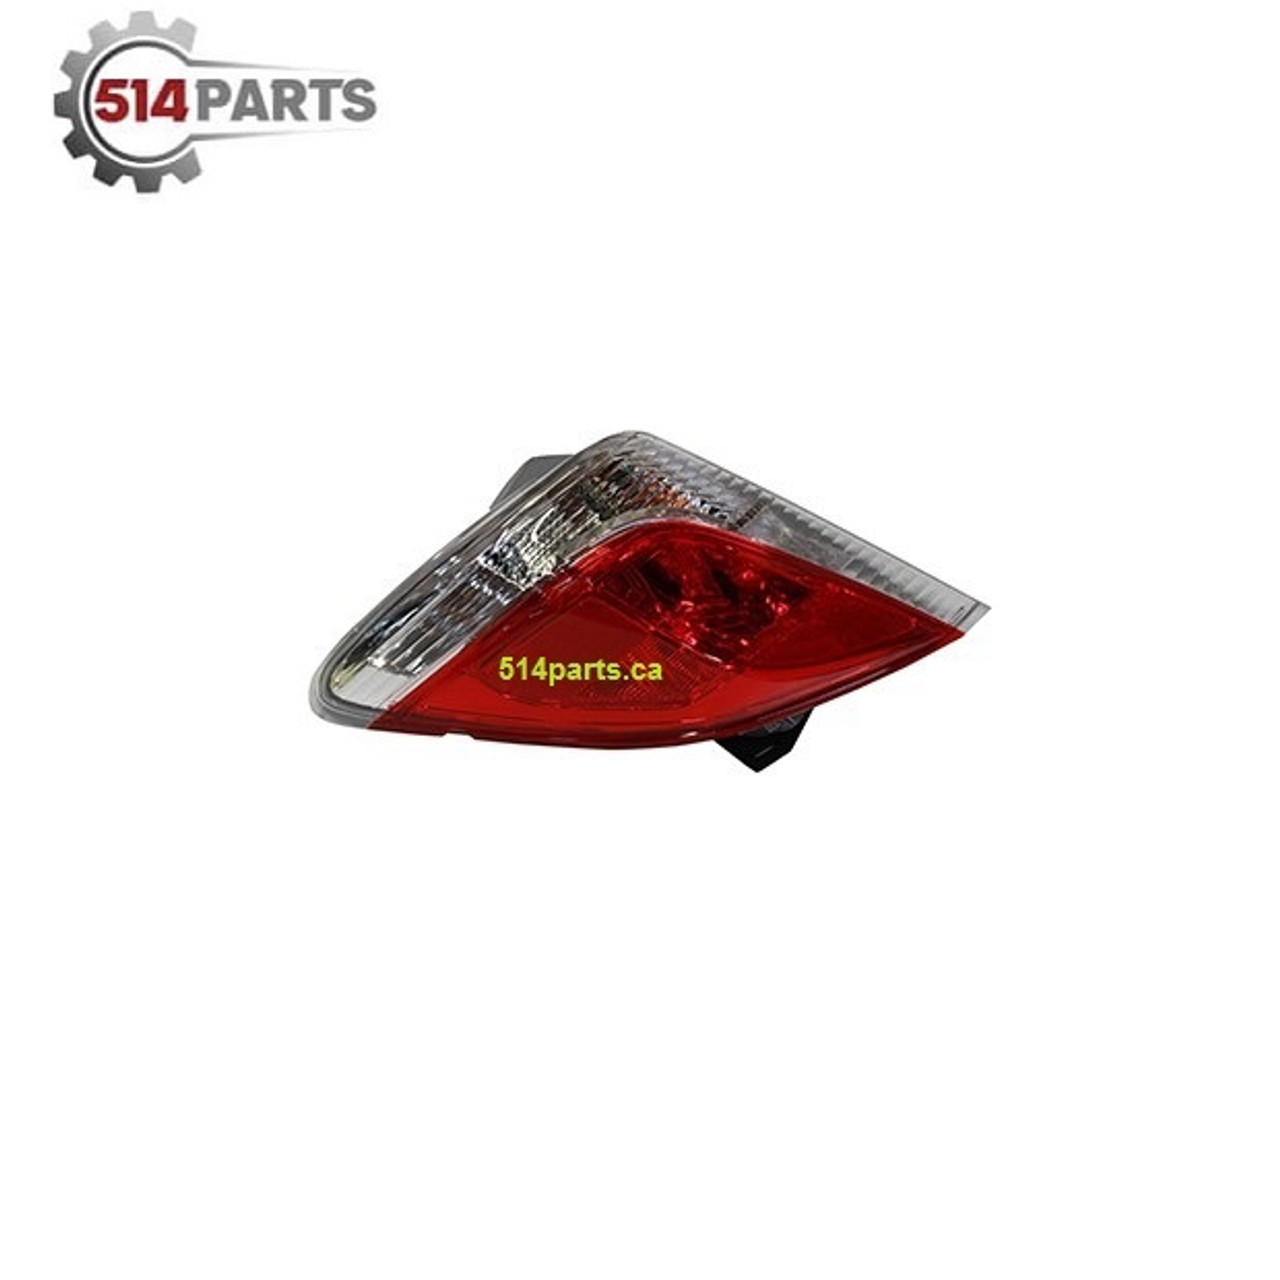 2012 - 2014 TOYOTA YARIS HATCHBACK TAIL LIGHTS High Quality - PHARES ARRIERE Haute Qualite